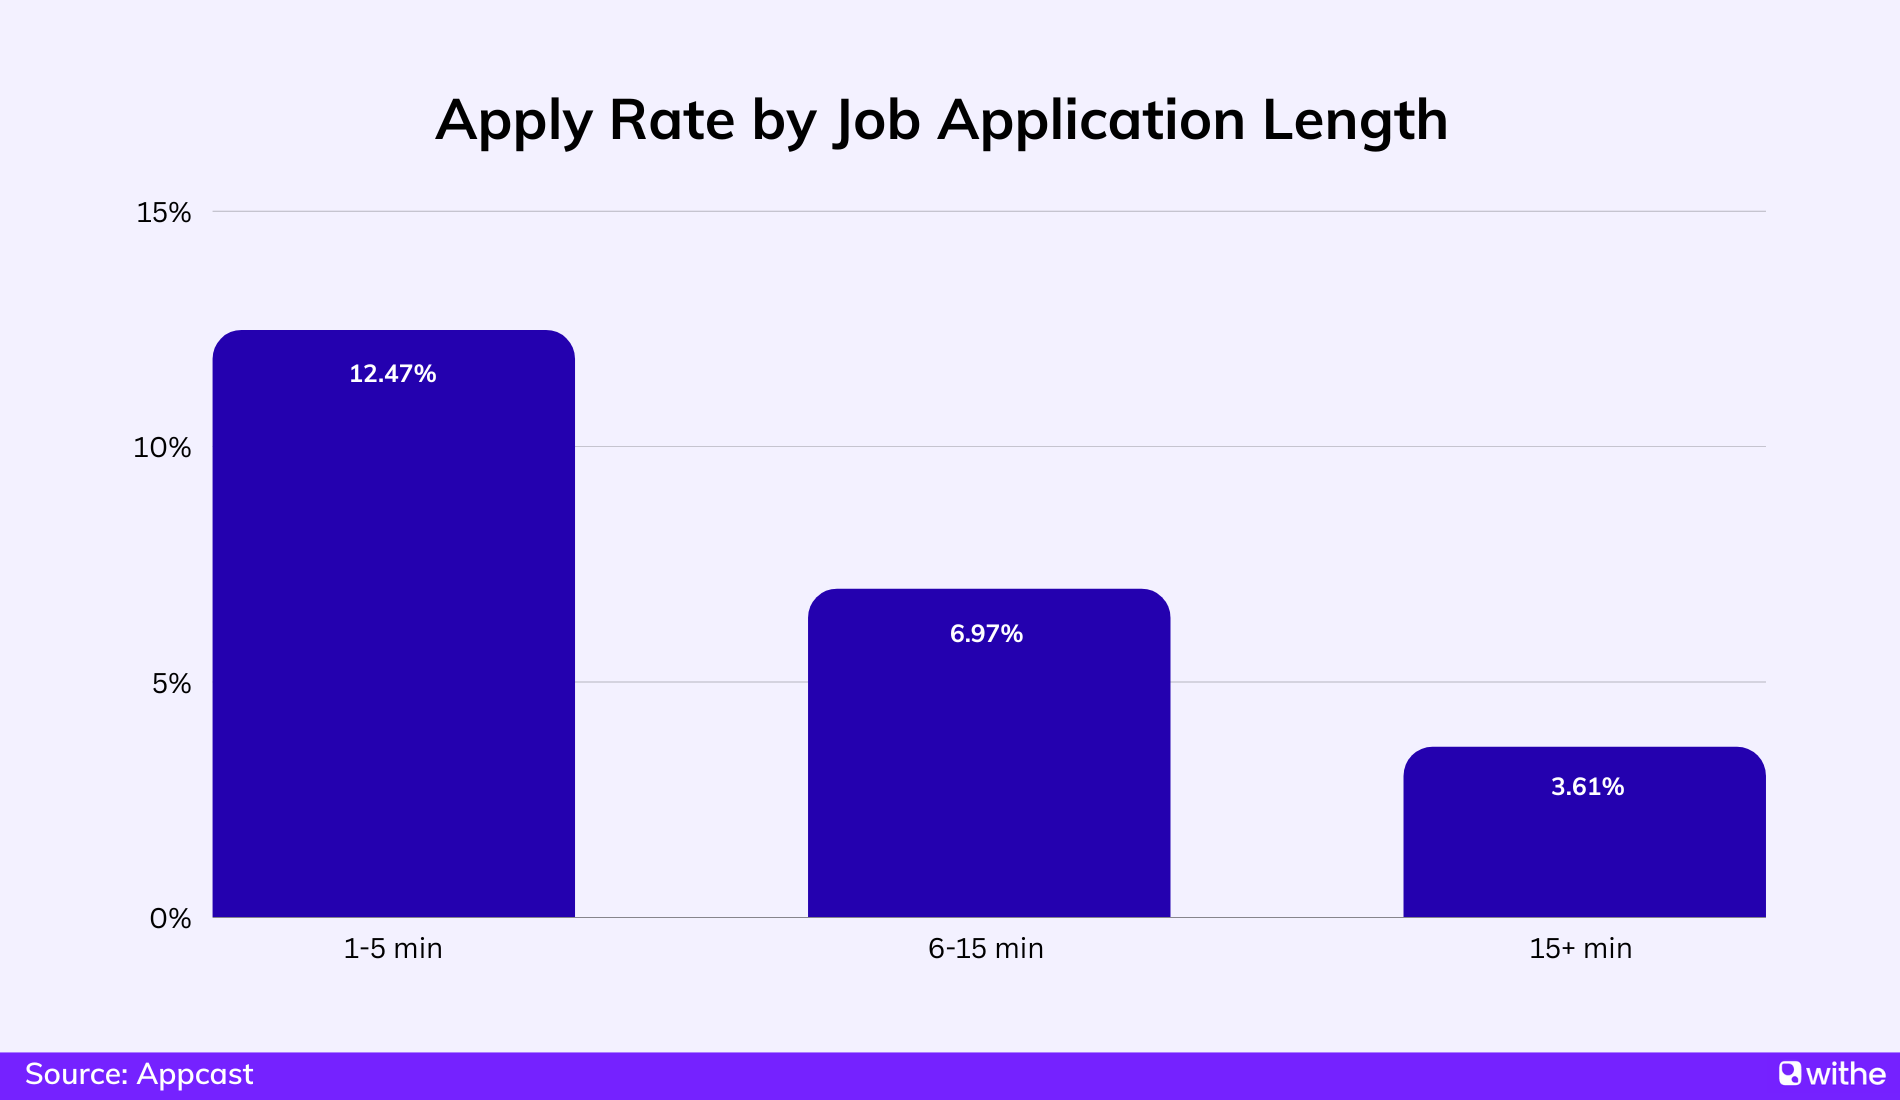 Apply rate by length of job application